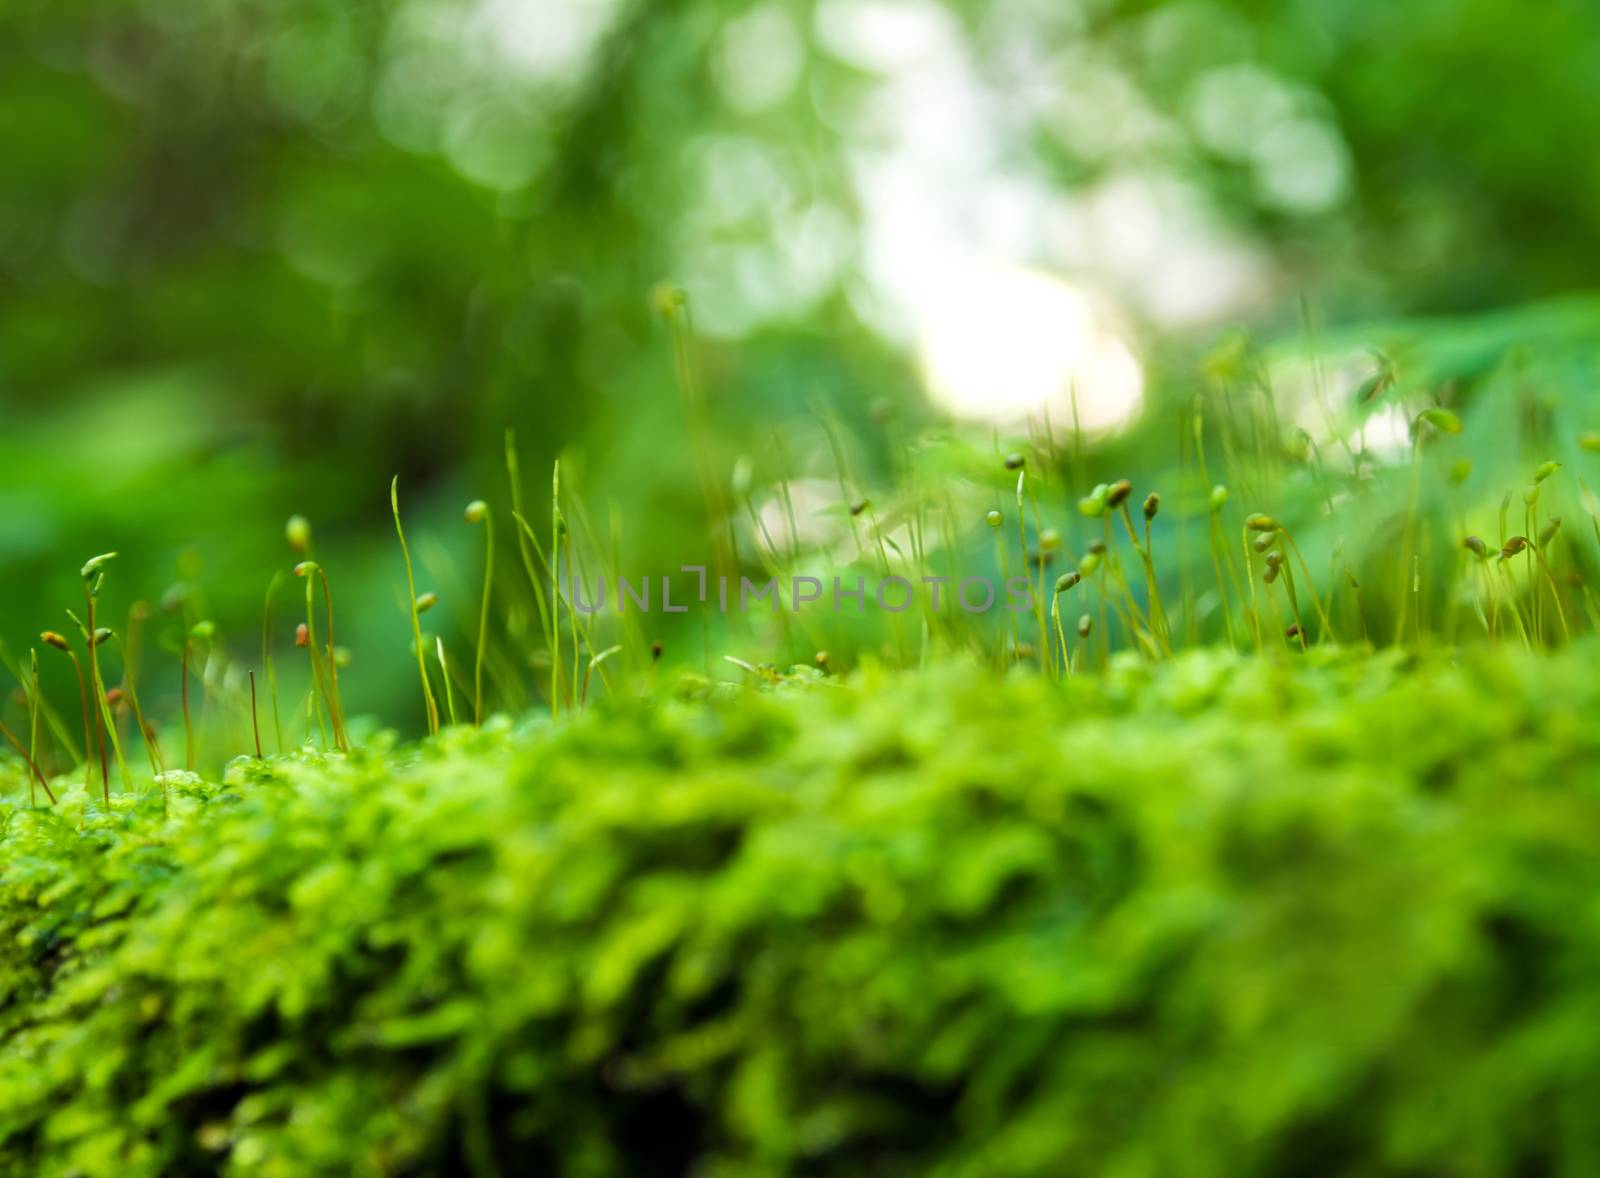 Sporophyte of freshness green moss with water drops growing in t by Satakorn